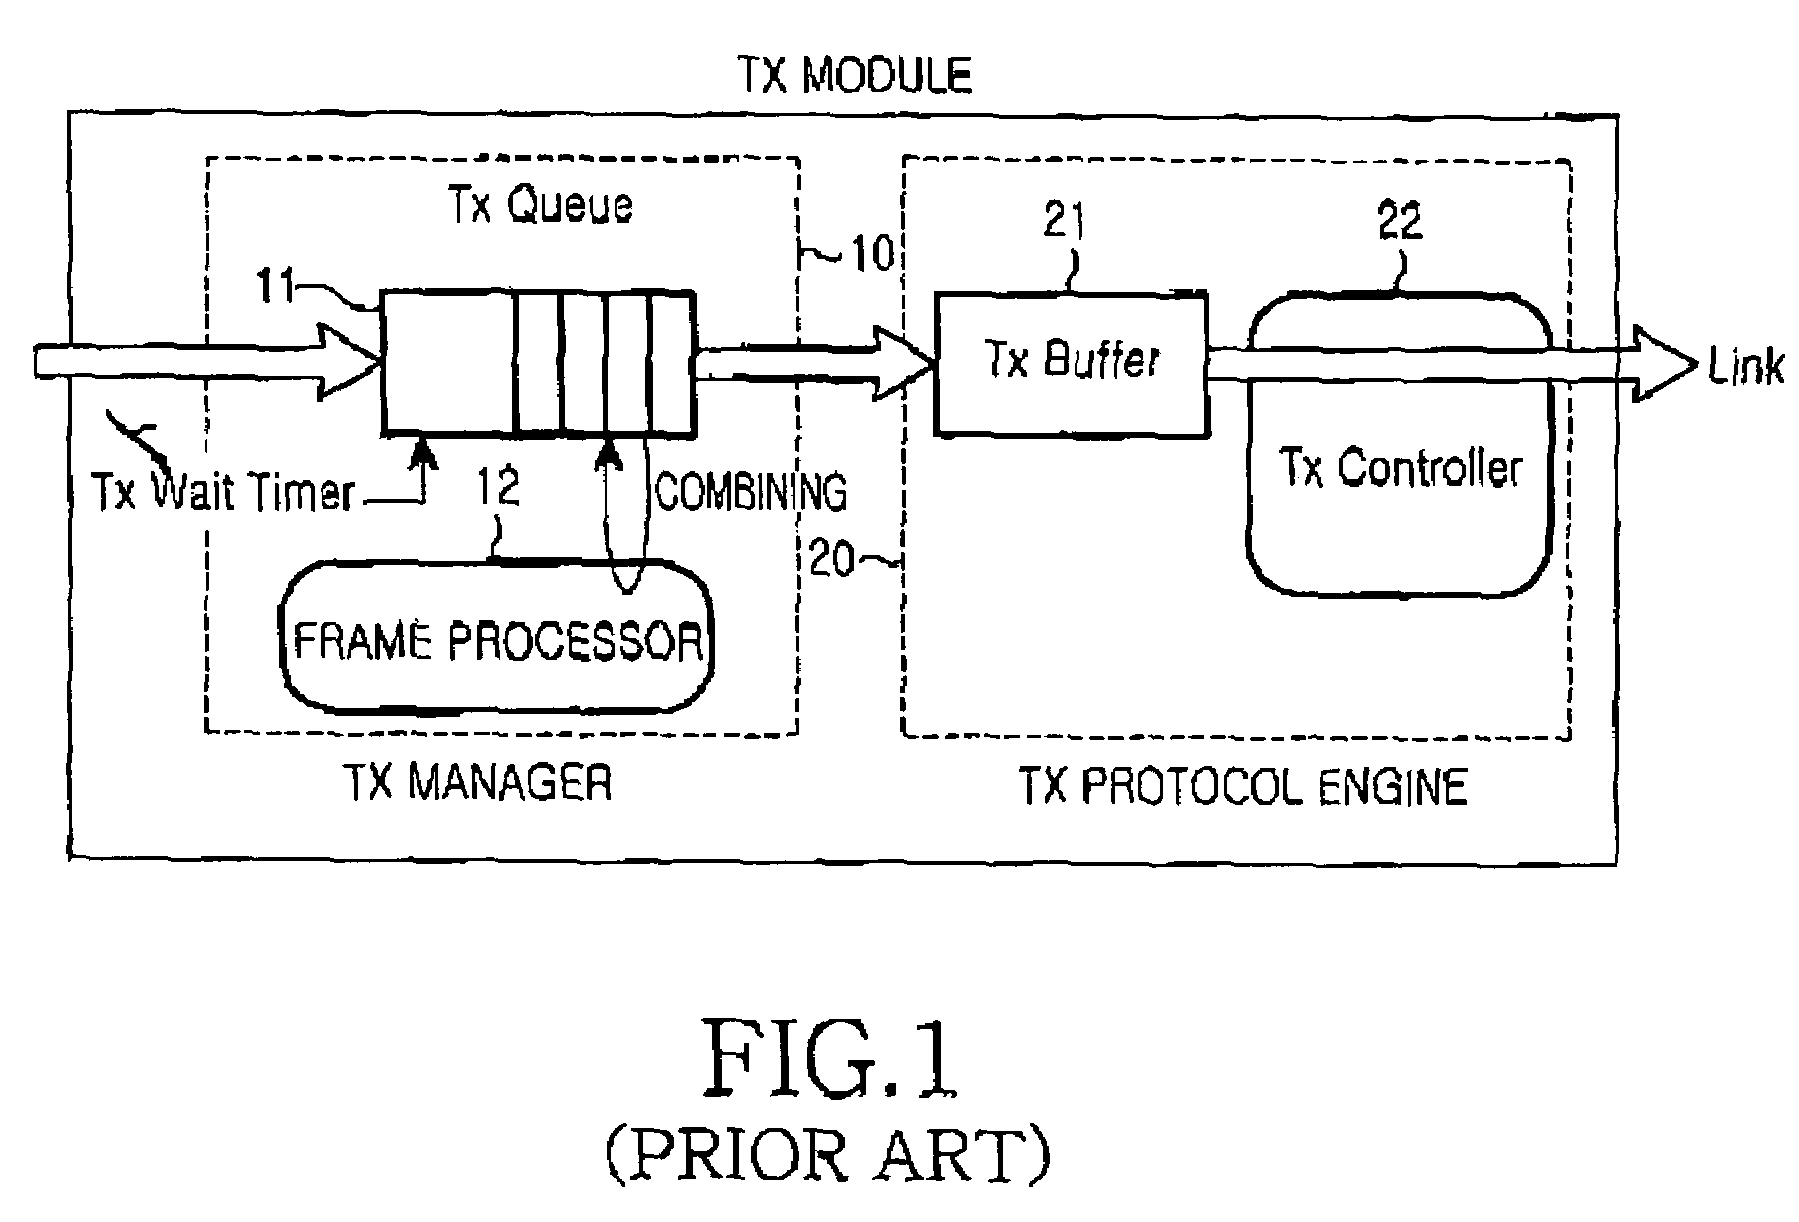 Apparatus and method for minimizing transmission delay in a data communication system